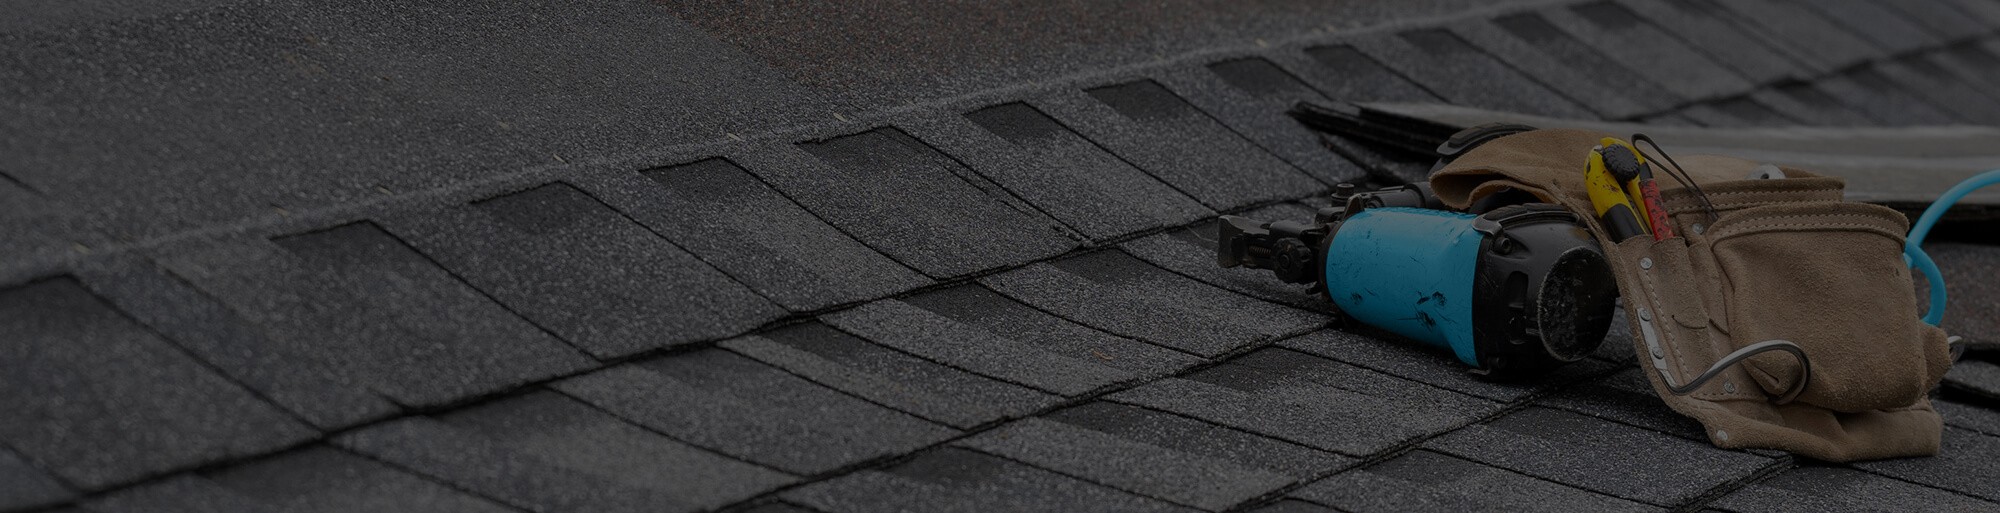 Cost-effective Wisconsin roof repair services available through Infinity